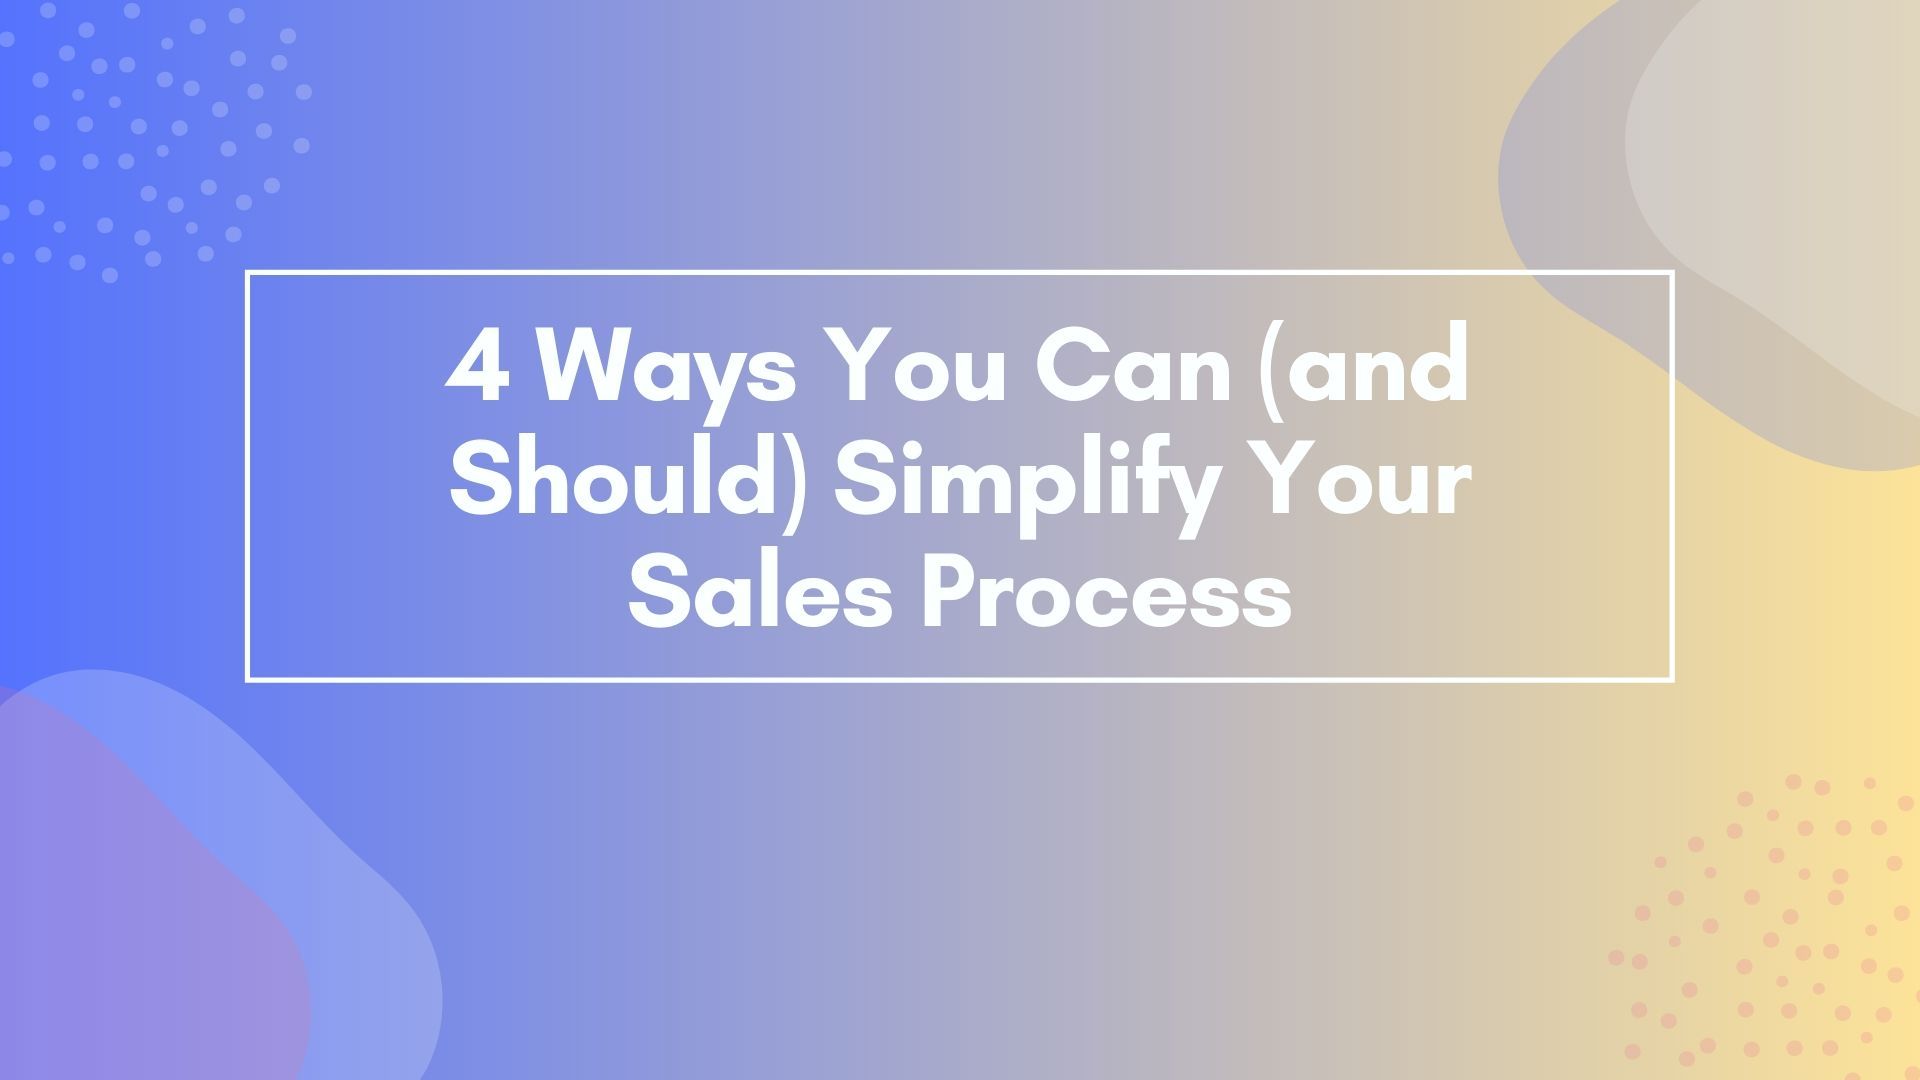 4 Ways You Can (and Should) Simplify Your Sales Process